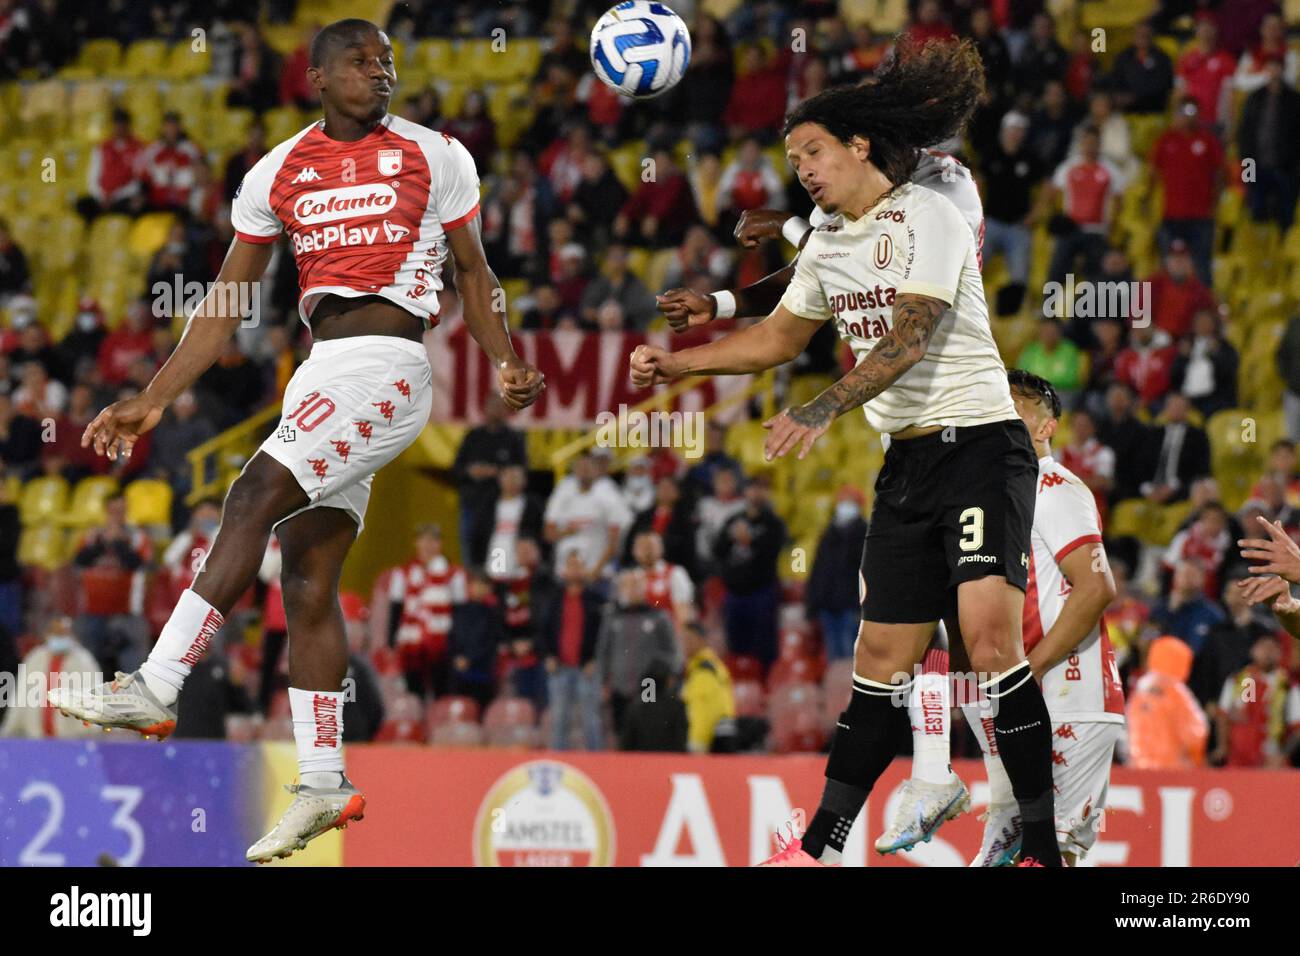 Bogota, Colombia. 08th June, 2023. Santa Fe's Dairon Mosquera and Universitario's William Riveros during the Peru's Universitario (0) V. Colombia's Santa Fe (2) group phase match of the CONMEBOL Libertadores, in Bogota, Colombia June 9, 2023. Photo by: Cristian Bayona/Long Visual Press Credit: Long Visual Press/Alamy Live News Stock Photo